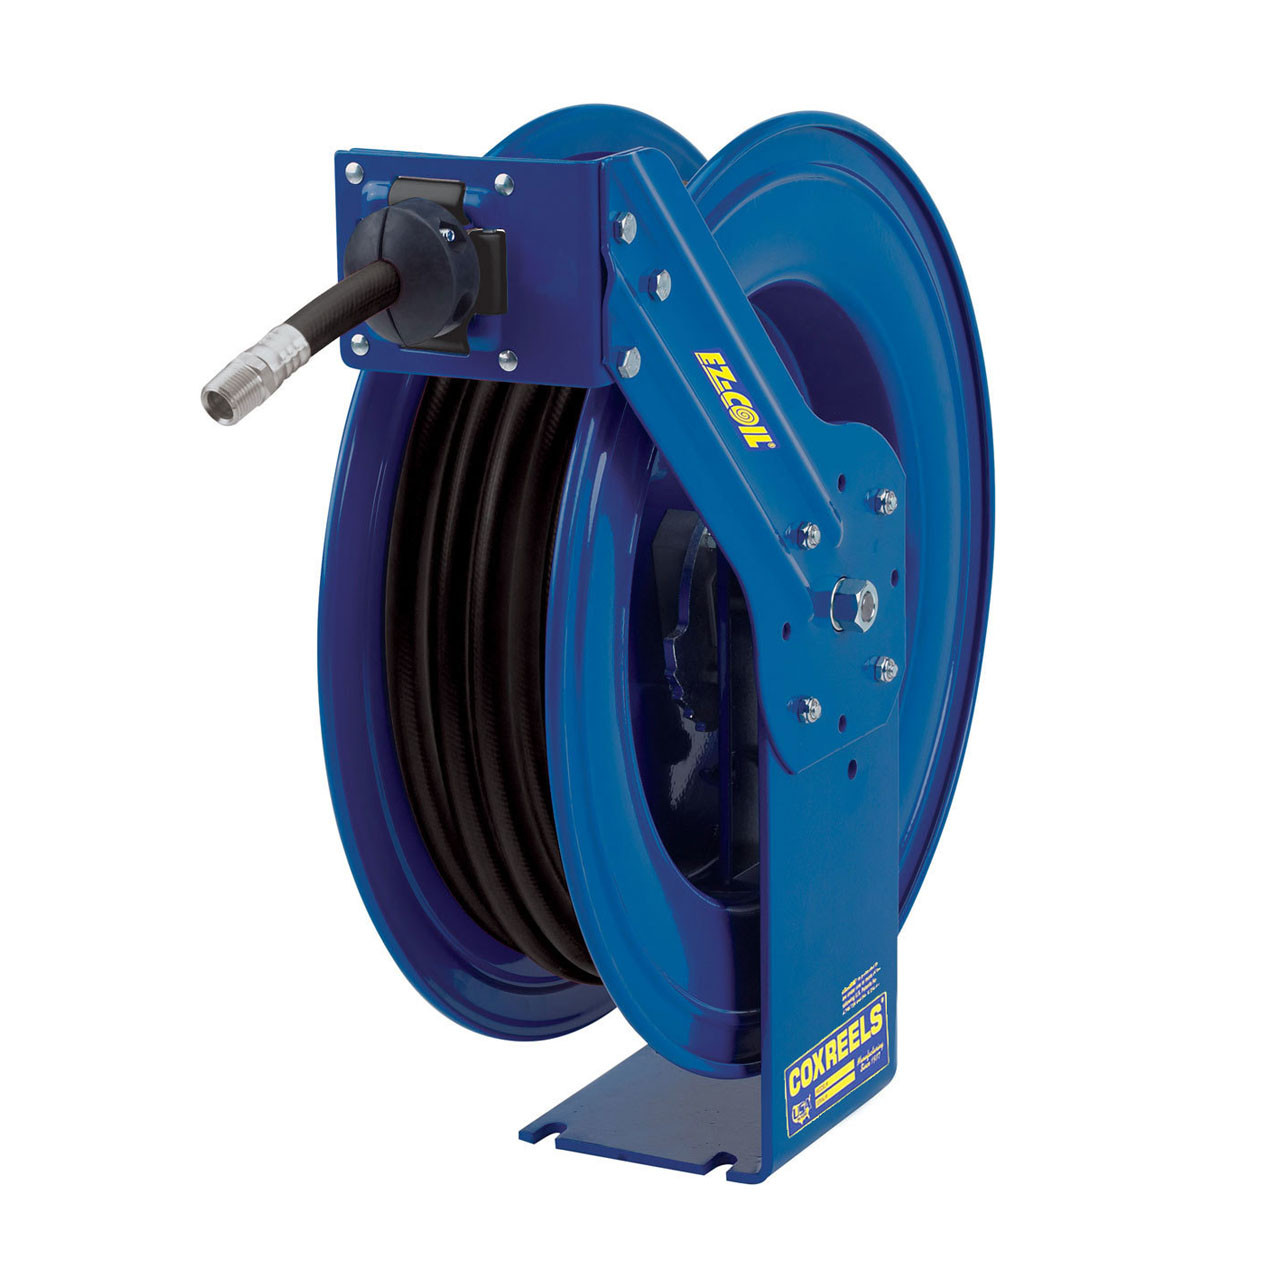 Stainless Steel Air Hose Reels - Hose, Cord and Cable Reels